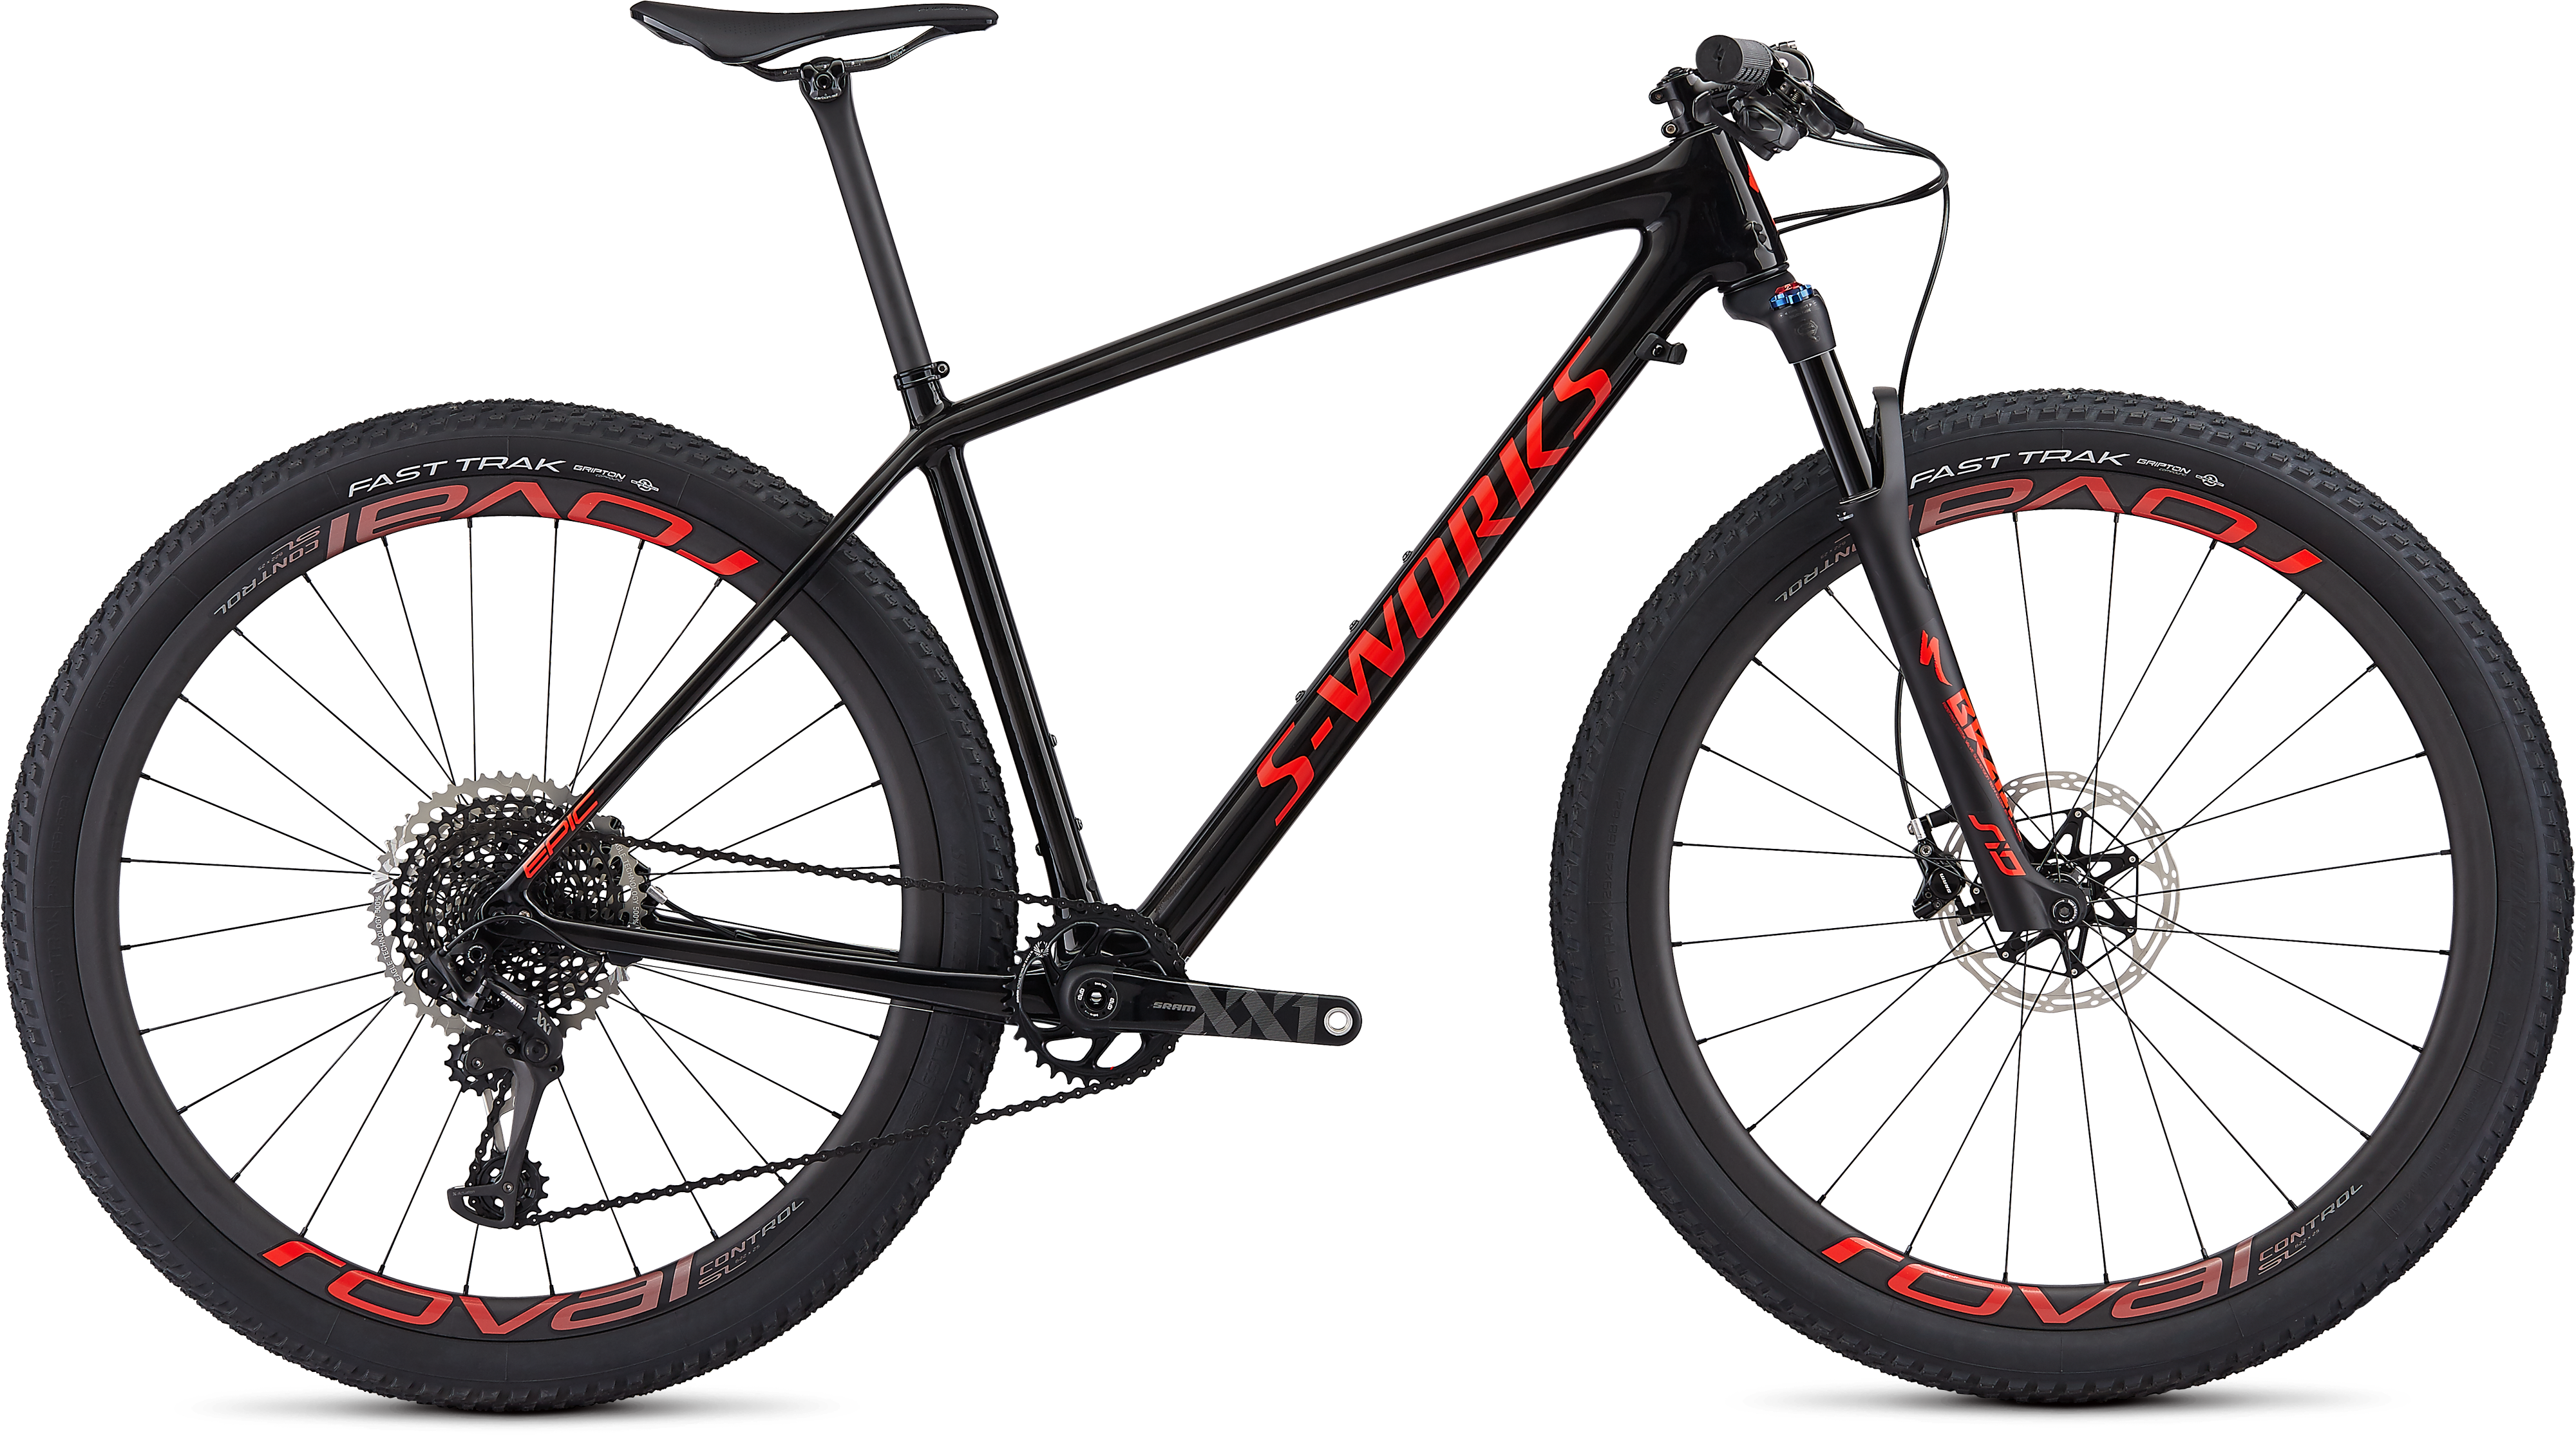 https://assets.specialized.com/i/specialized/91319-00_EPIC-HT_SW-CARBON-SRAM-29_CARB-RKTRED_HERO?$scom-pdp-product-image$&fmt=auto